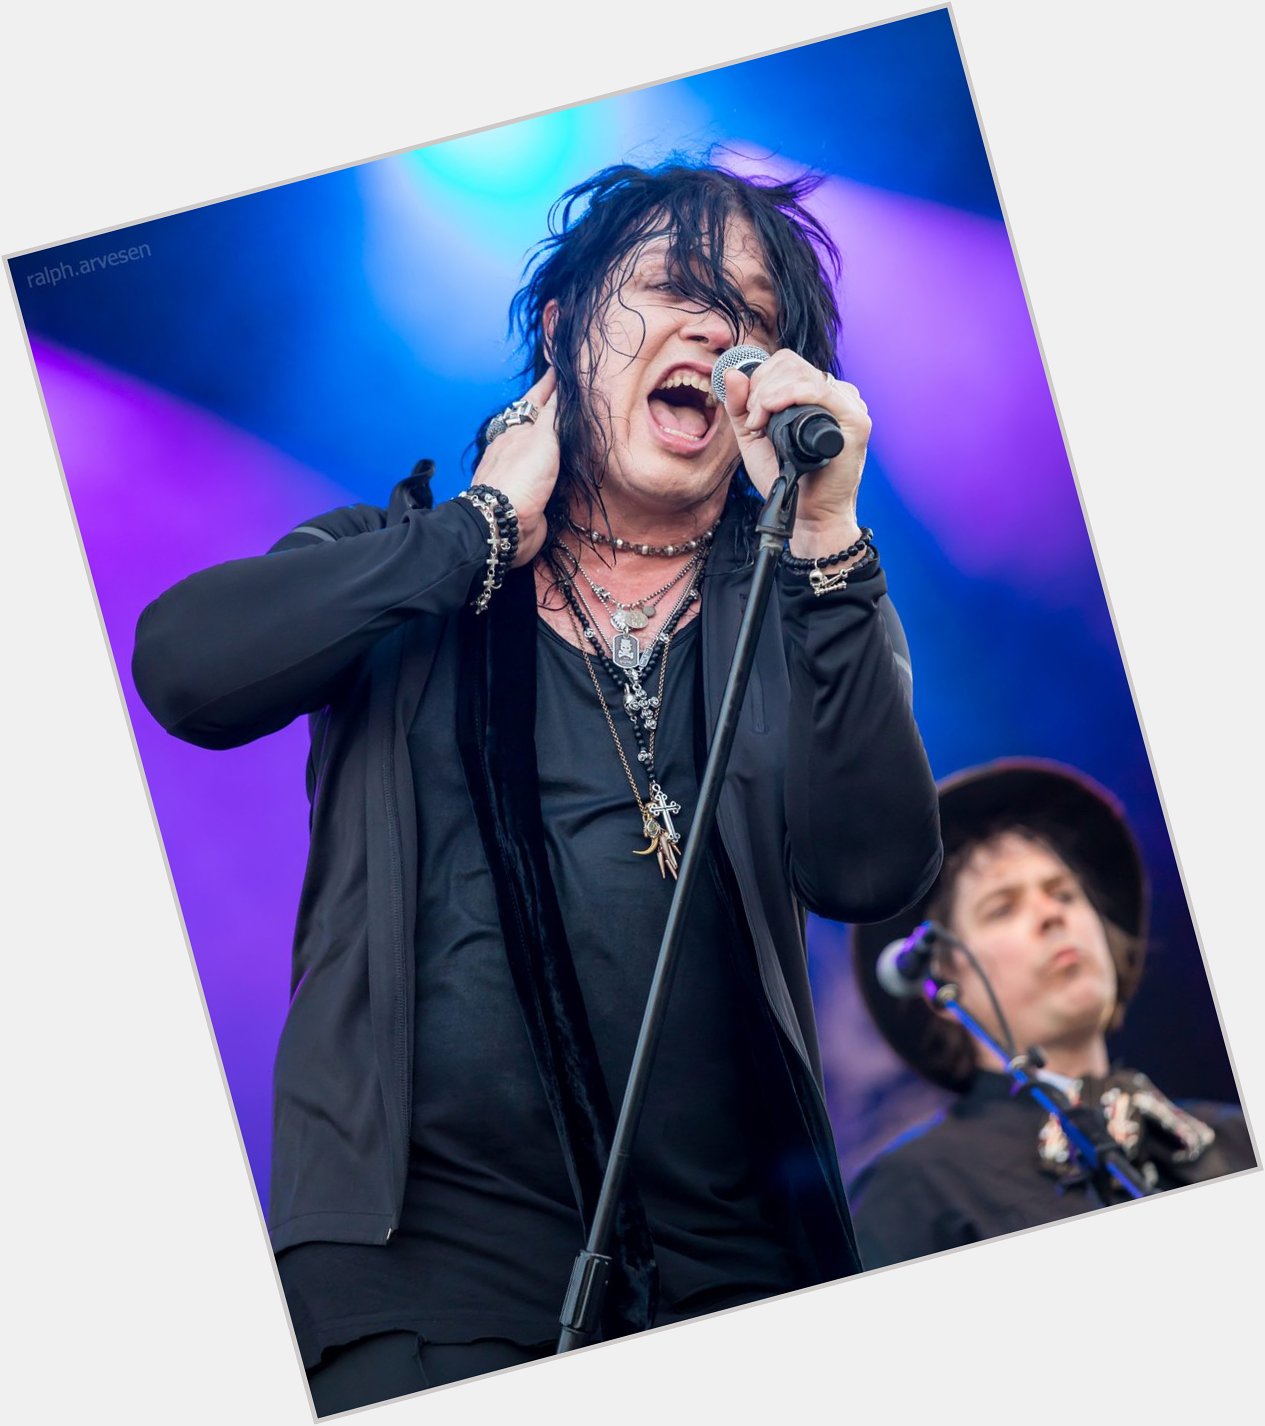 Please join me here at in wishing the one and only Tom Keifer a very Happy 60th Birthday today  